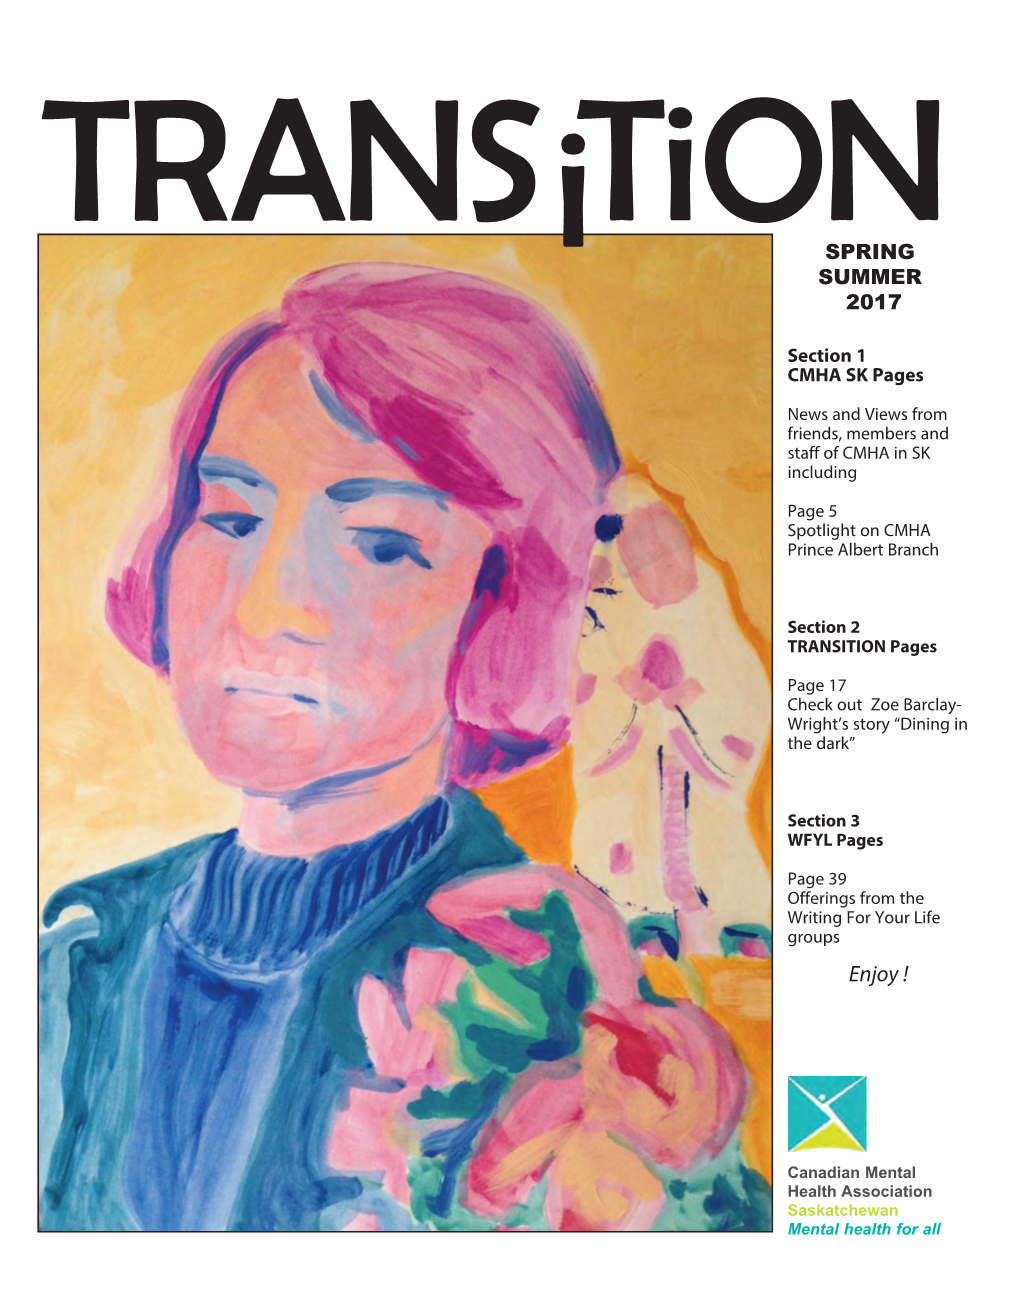 TRANSITION Magazine Is Published Three Times a Year by 5